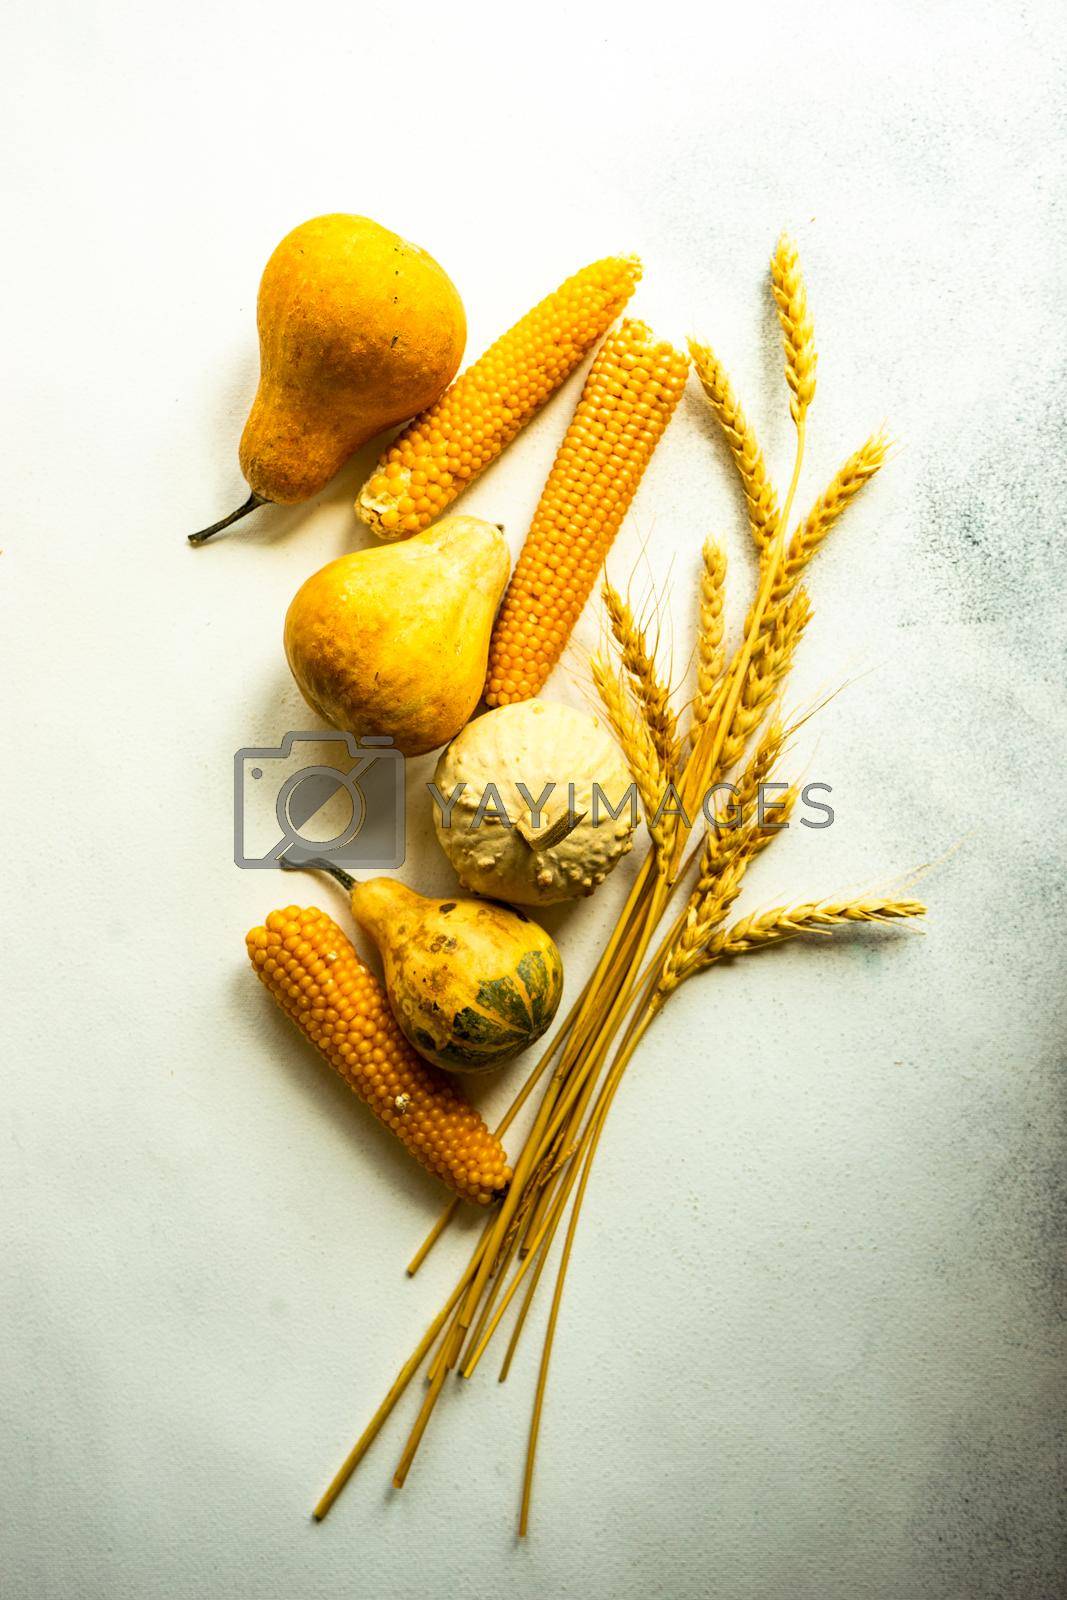 Royalty free image of Autumnal harvest concept by Elet